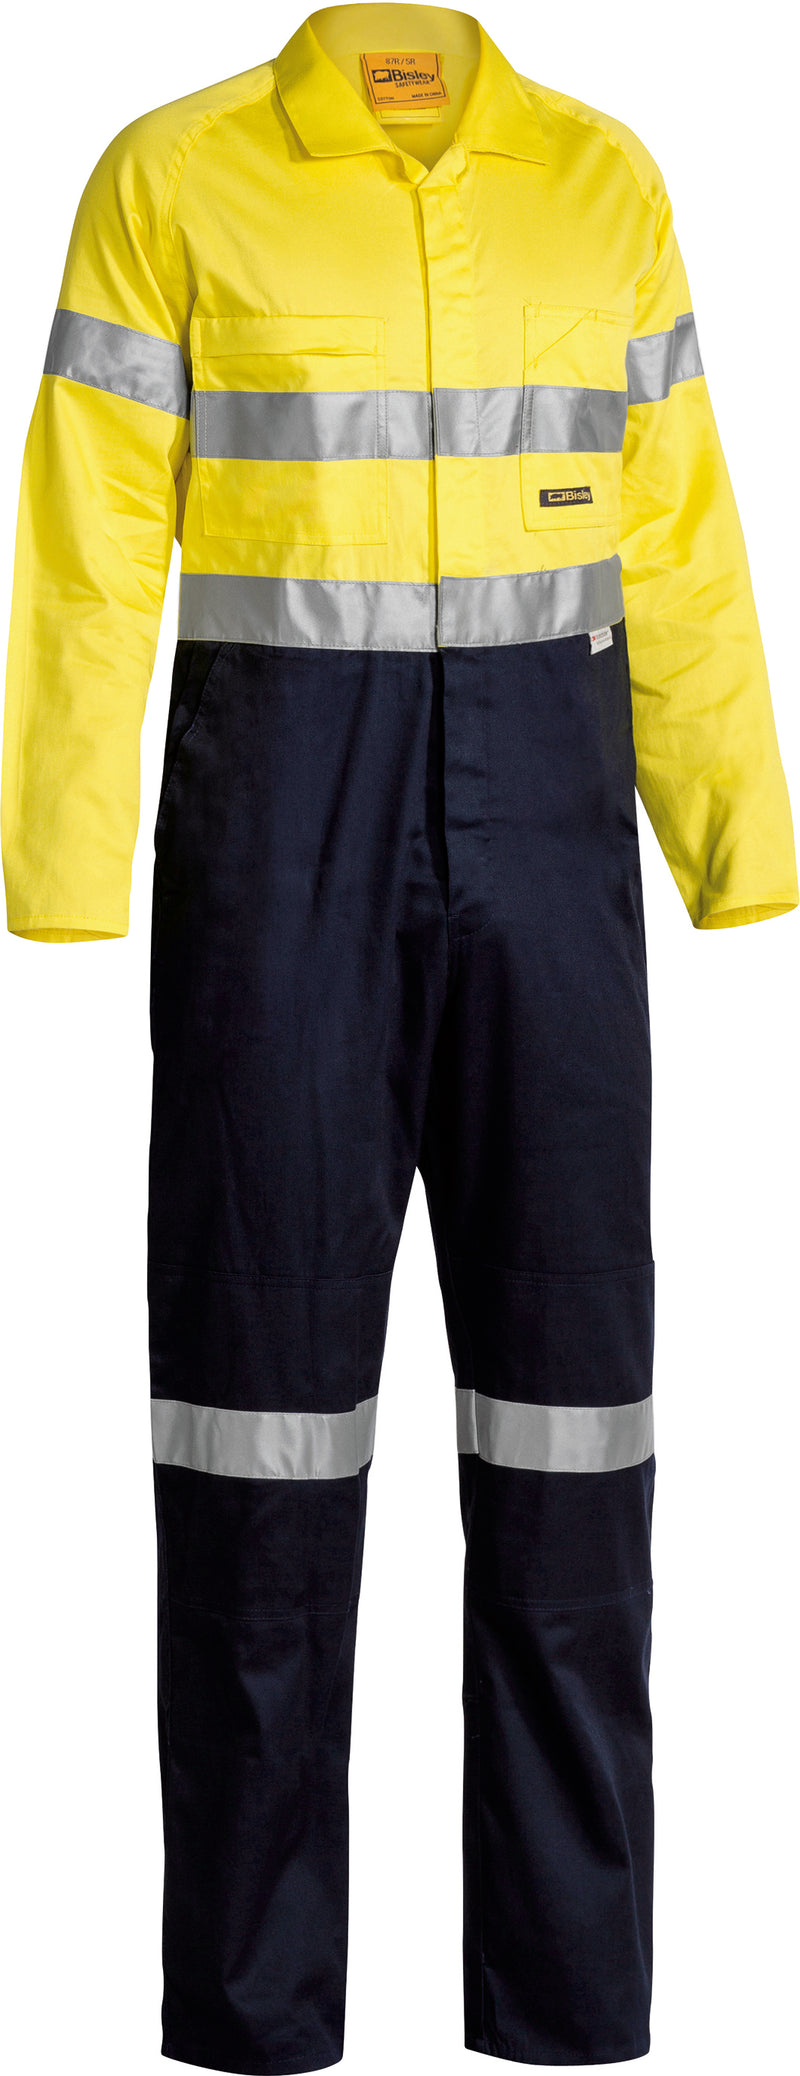 Load image into Gallery viewer, Wholesale BC6719TW Bisley 2 Tone Hi Vis Lightweight Overalls 3M Reflective Tape - Regular Printed or Blank
